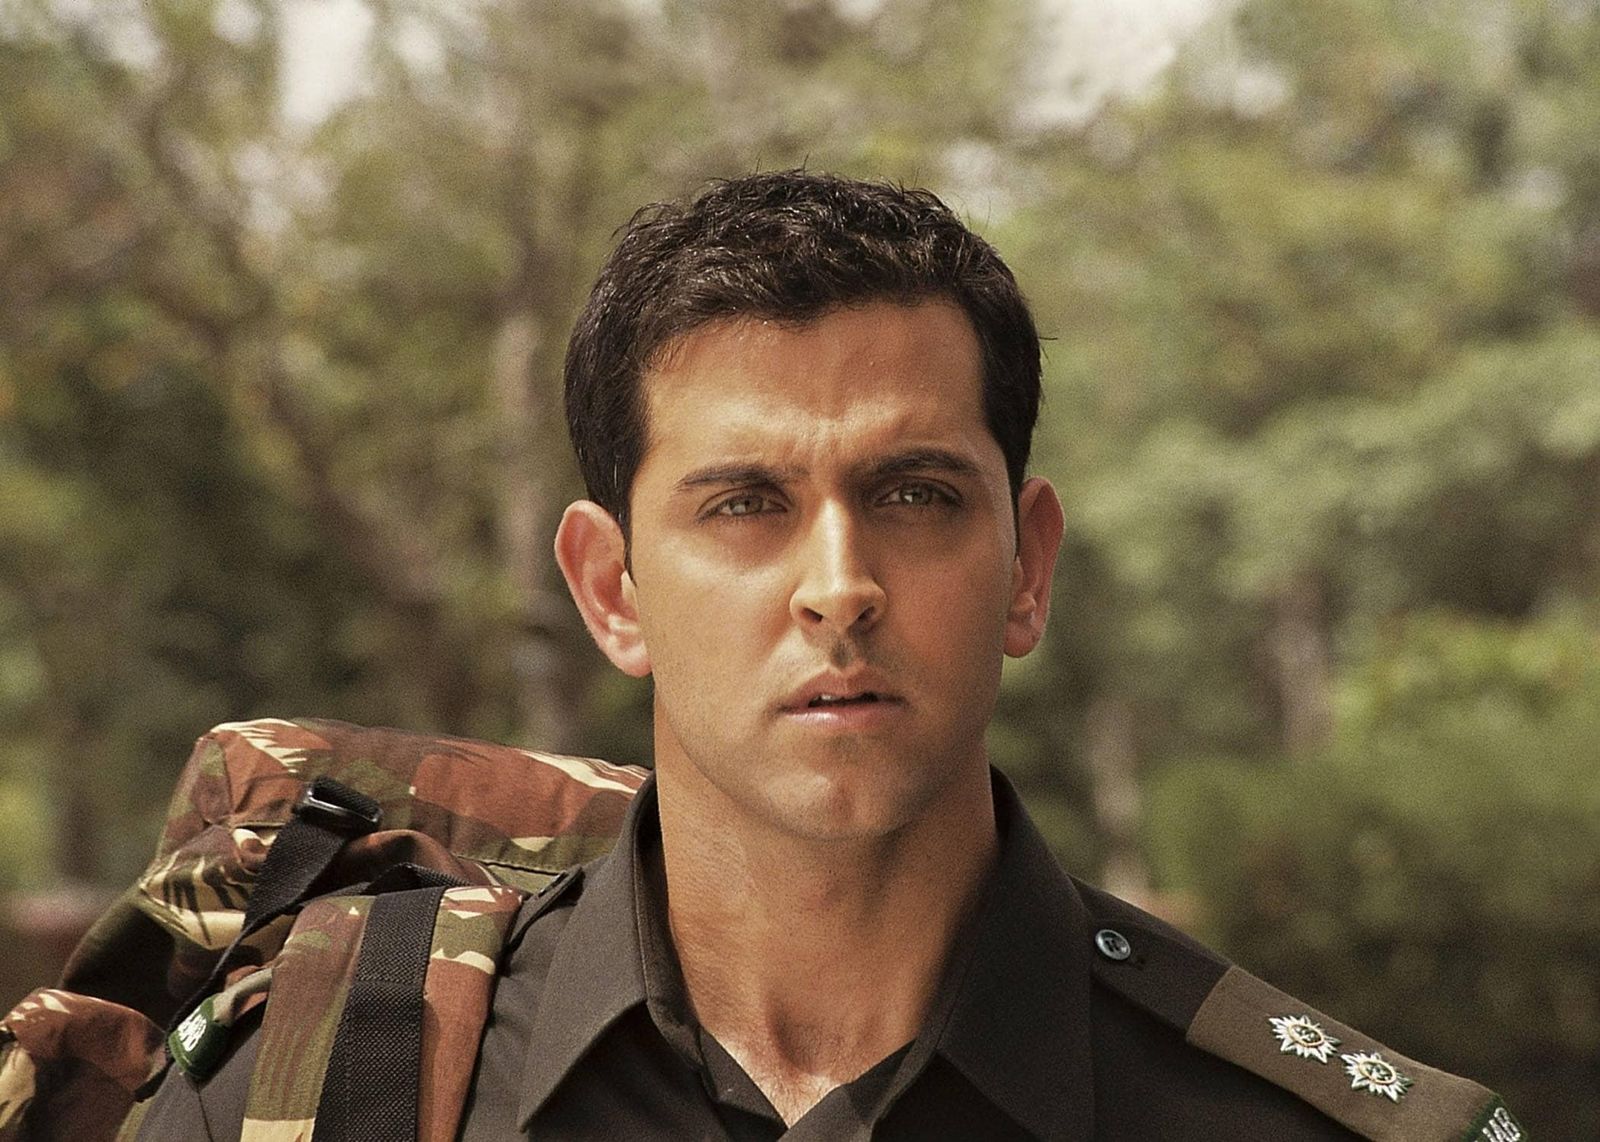 Hrithik Roshan Celebrates 15 Years Of Lakshya, Feels The Film Resonated With His 'Phase Of Self-Discovery As An Actor'